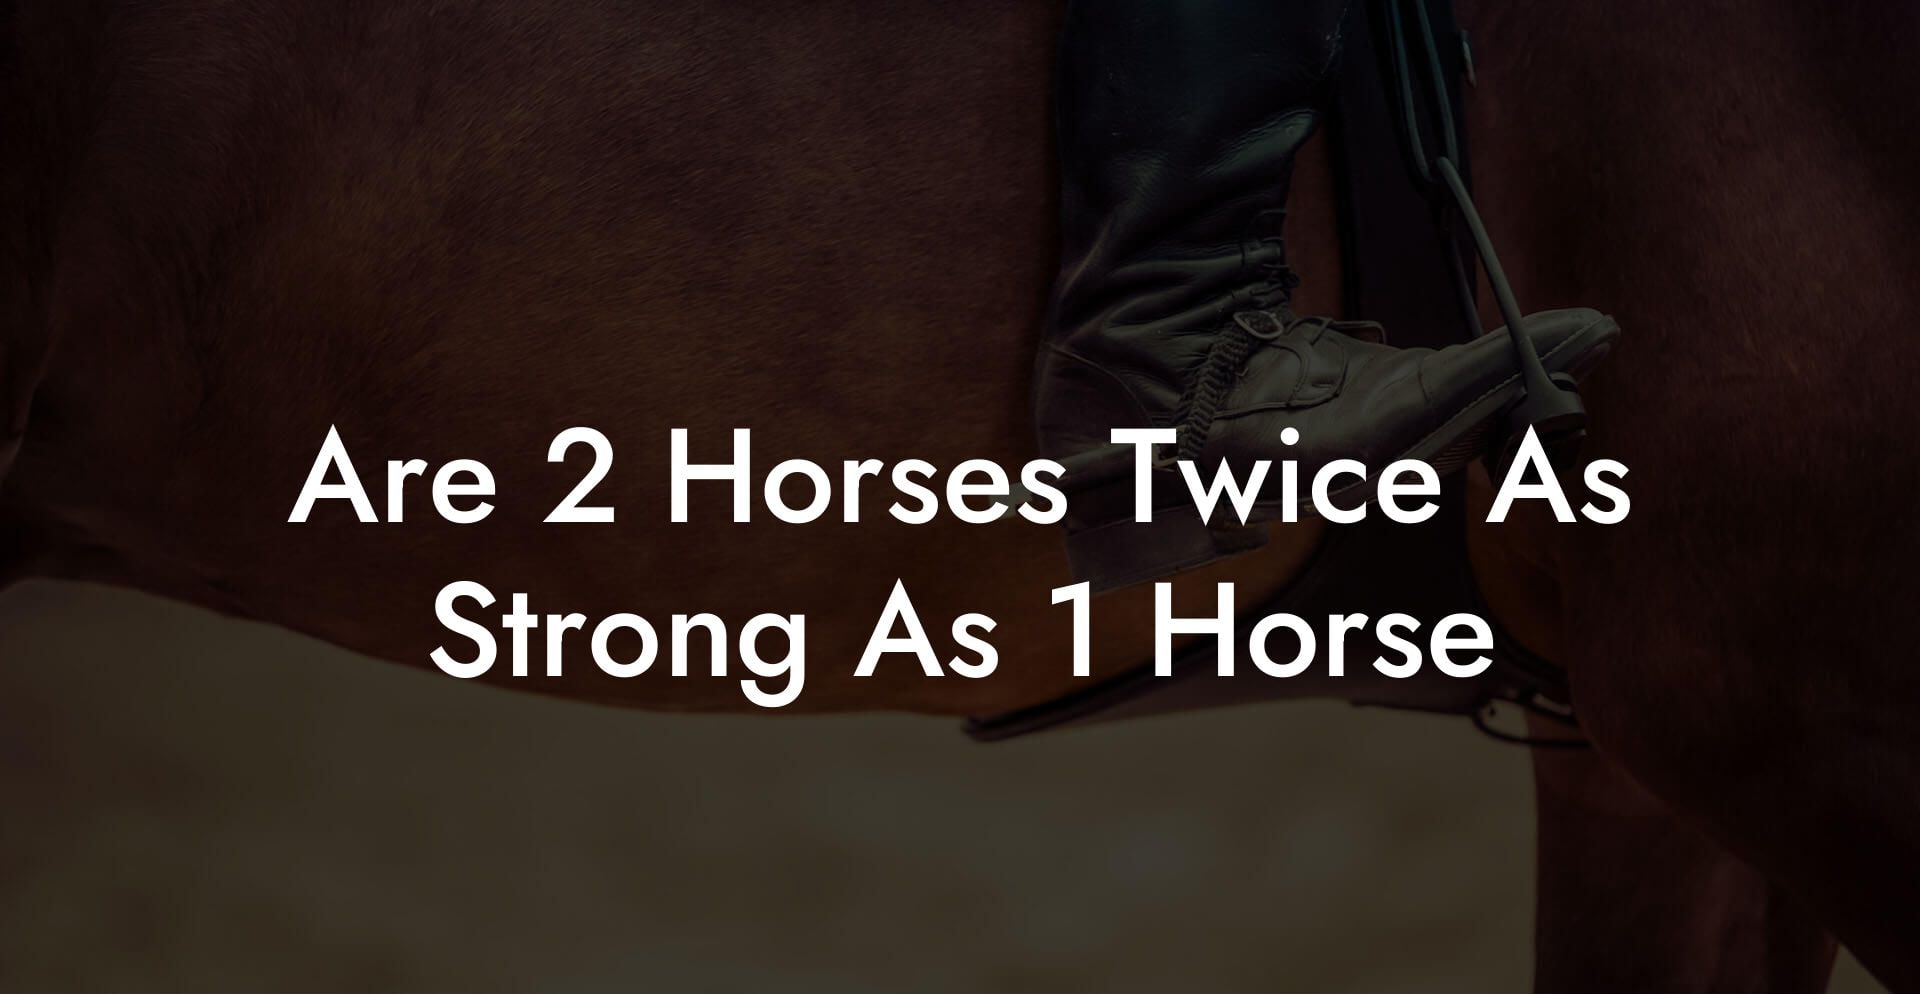 Are 2 Horses Twice As Strong As 1 Horse